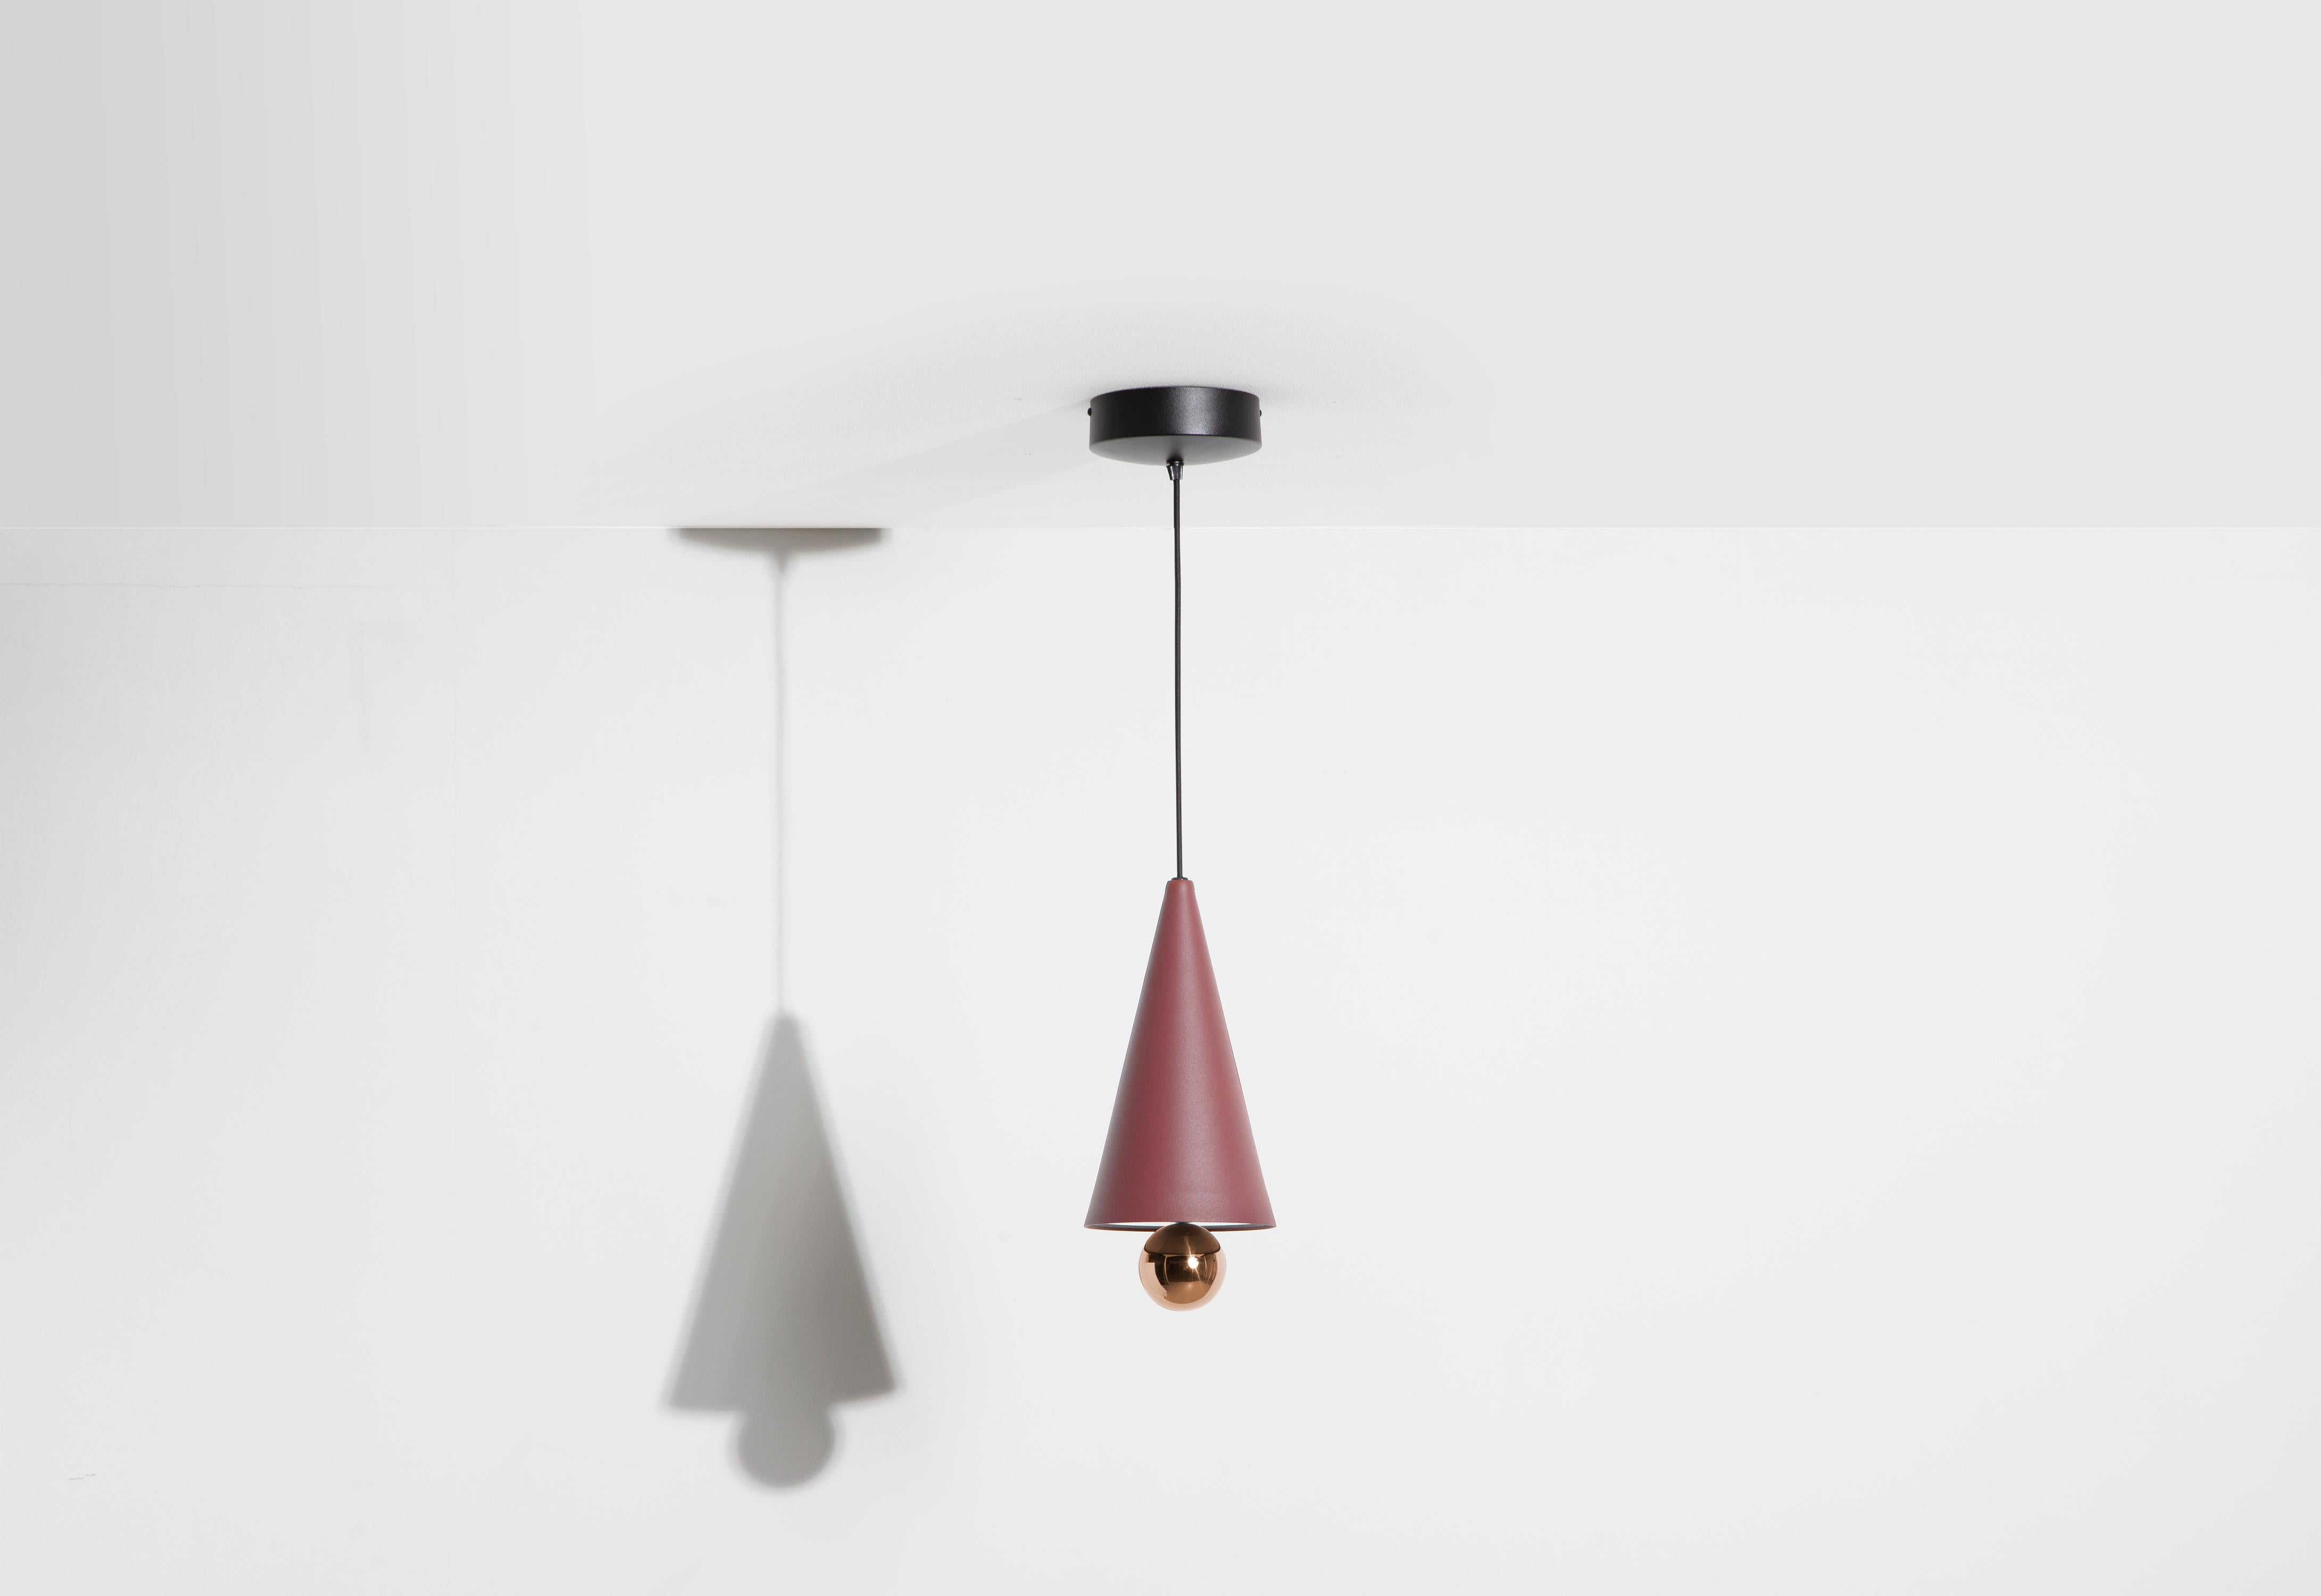 Petite Friture Small Cherry LED Pendant Light in Brown-red & Pink Gold Aluminium by Daniel and Emma, 2020

In 2015, the Australian duo designers Daniel and Emma signed Cherry a simple and minimalist pendant lamp design ; an aluminum cone with a